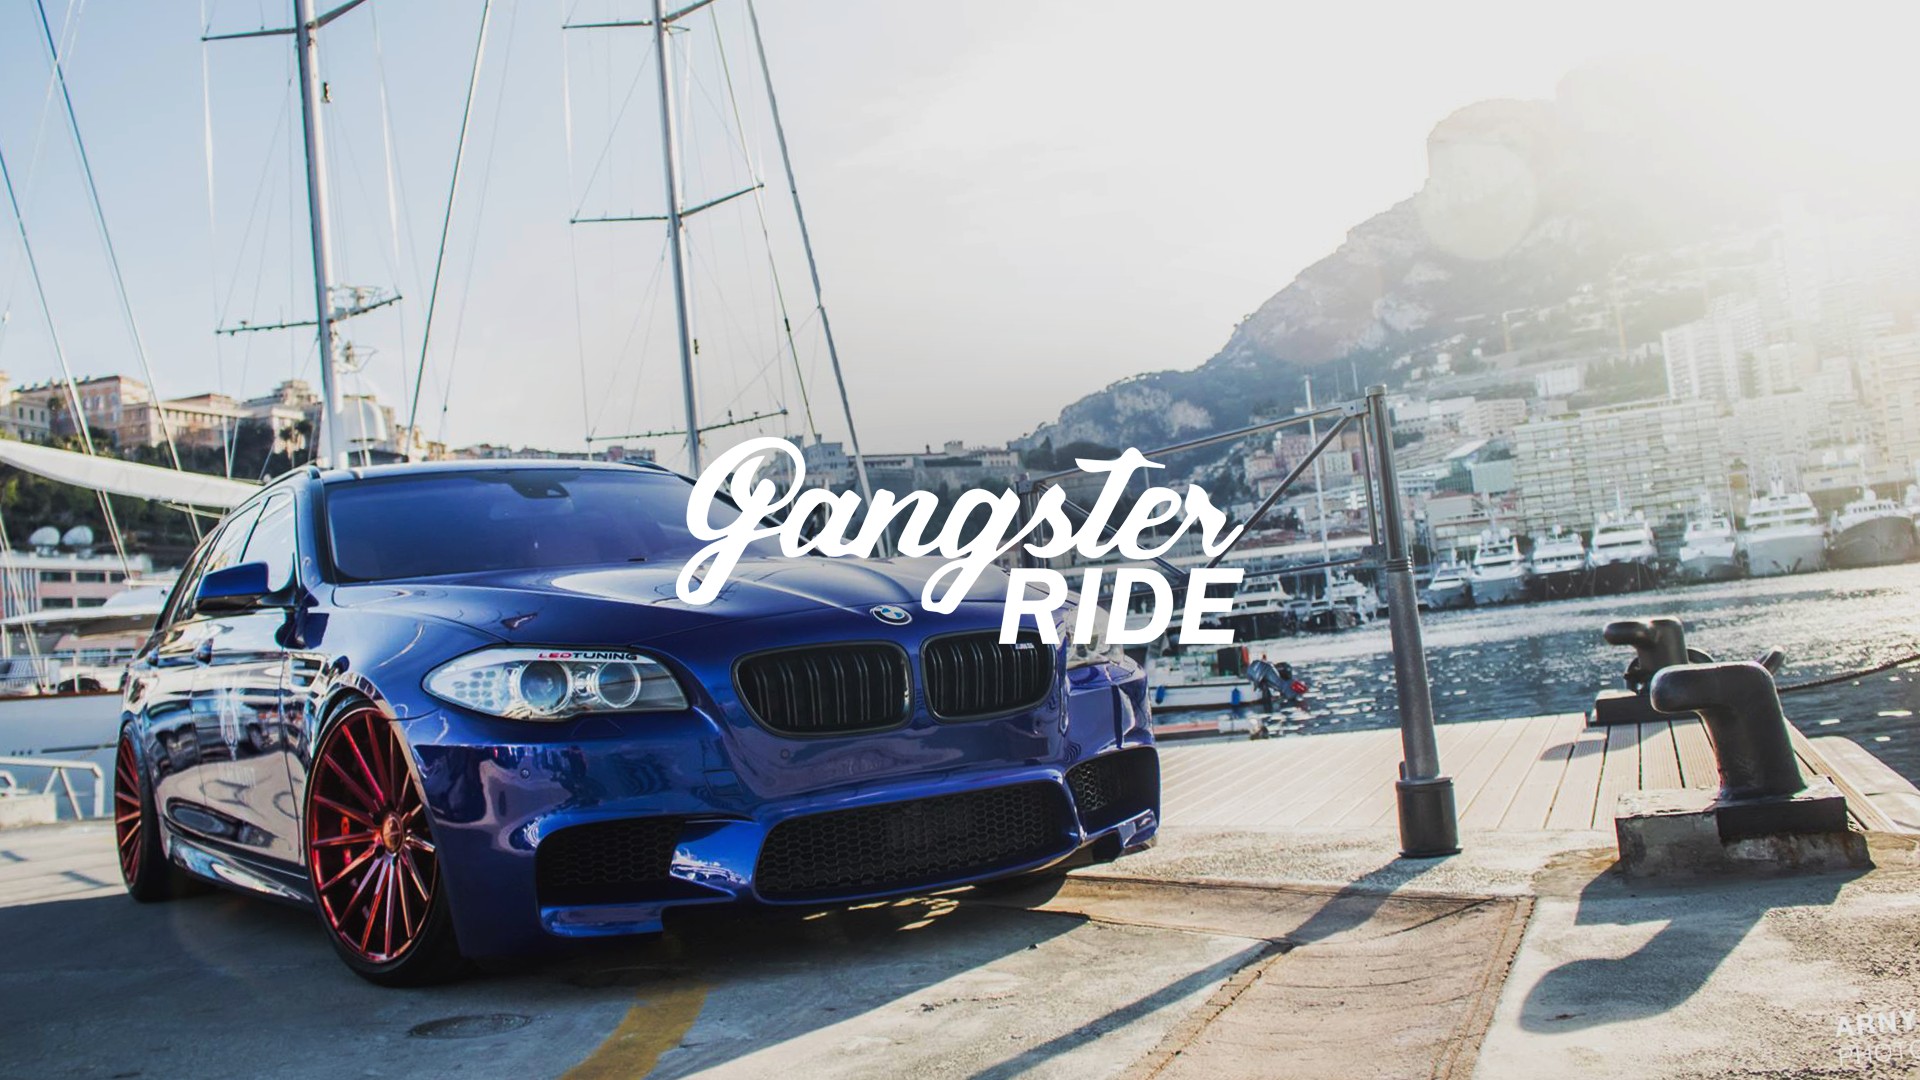 GANGSTER RIDE, Police, Gangsters, Gangster, Smoke, Smoking, Lowrider, BMX, Mask, Gas masks, BMW, Car, Colorful, YouTube Wallpaper HD / Desktop and Mobile Background